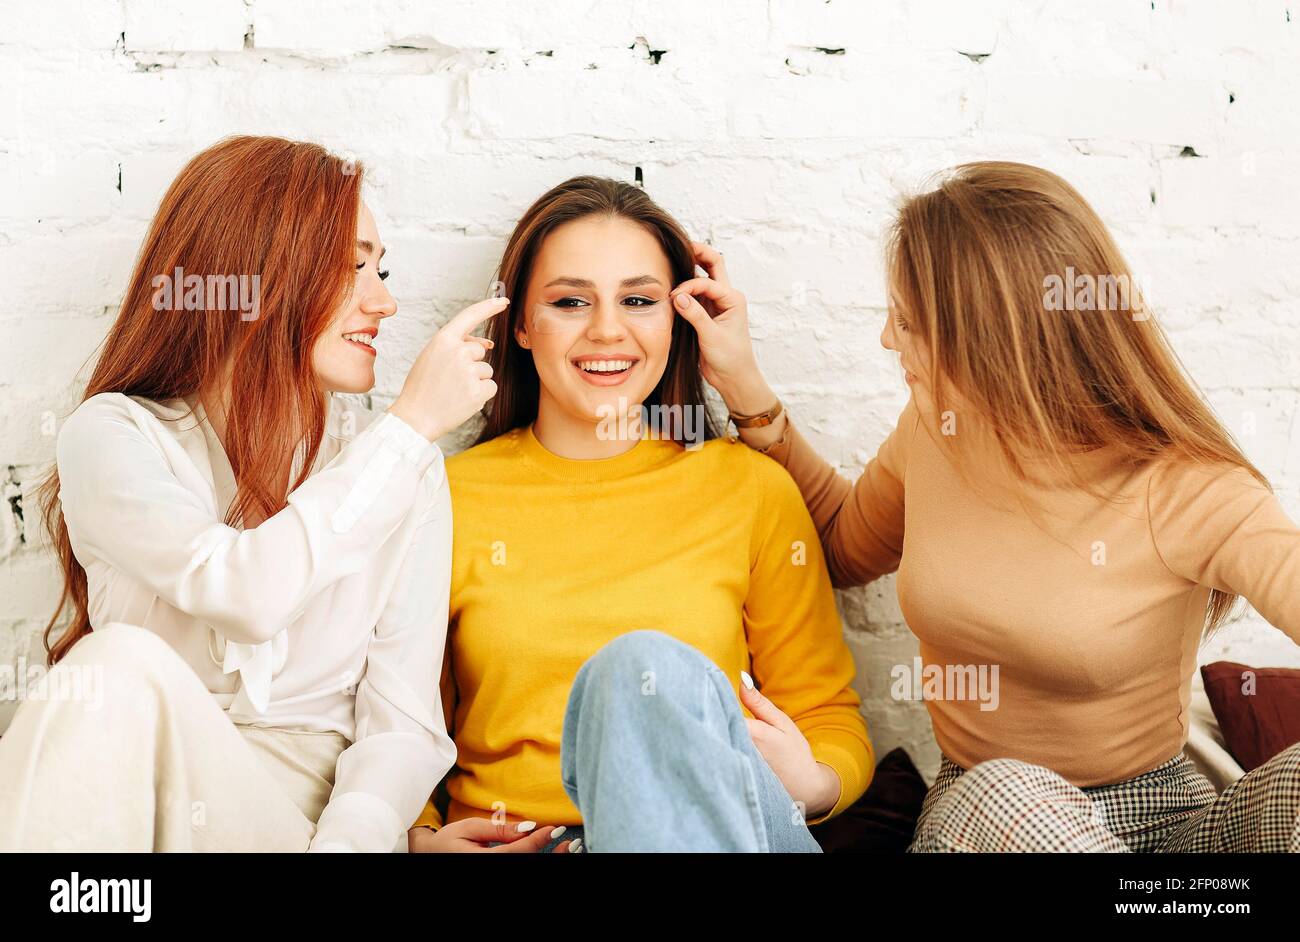 Optimistic young women smiling and touching face of stylish girlfriend while resting near rough brick wall Stock Photo